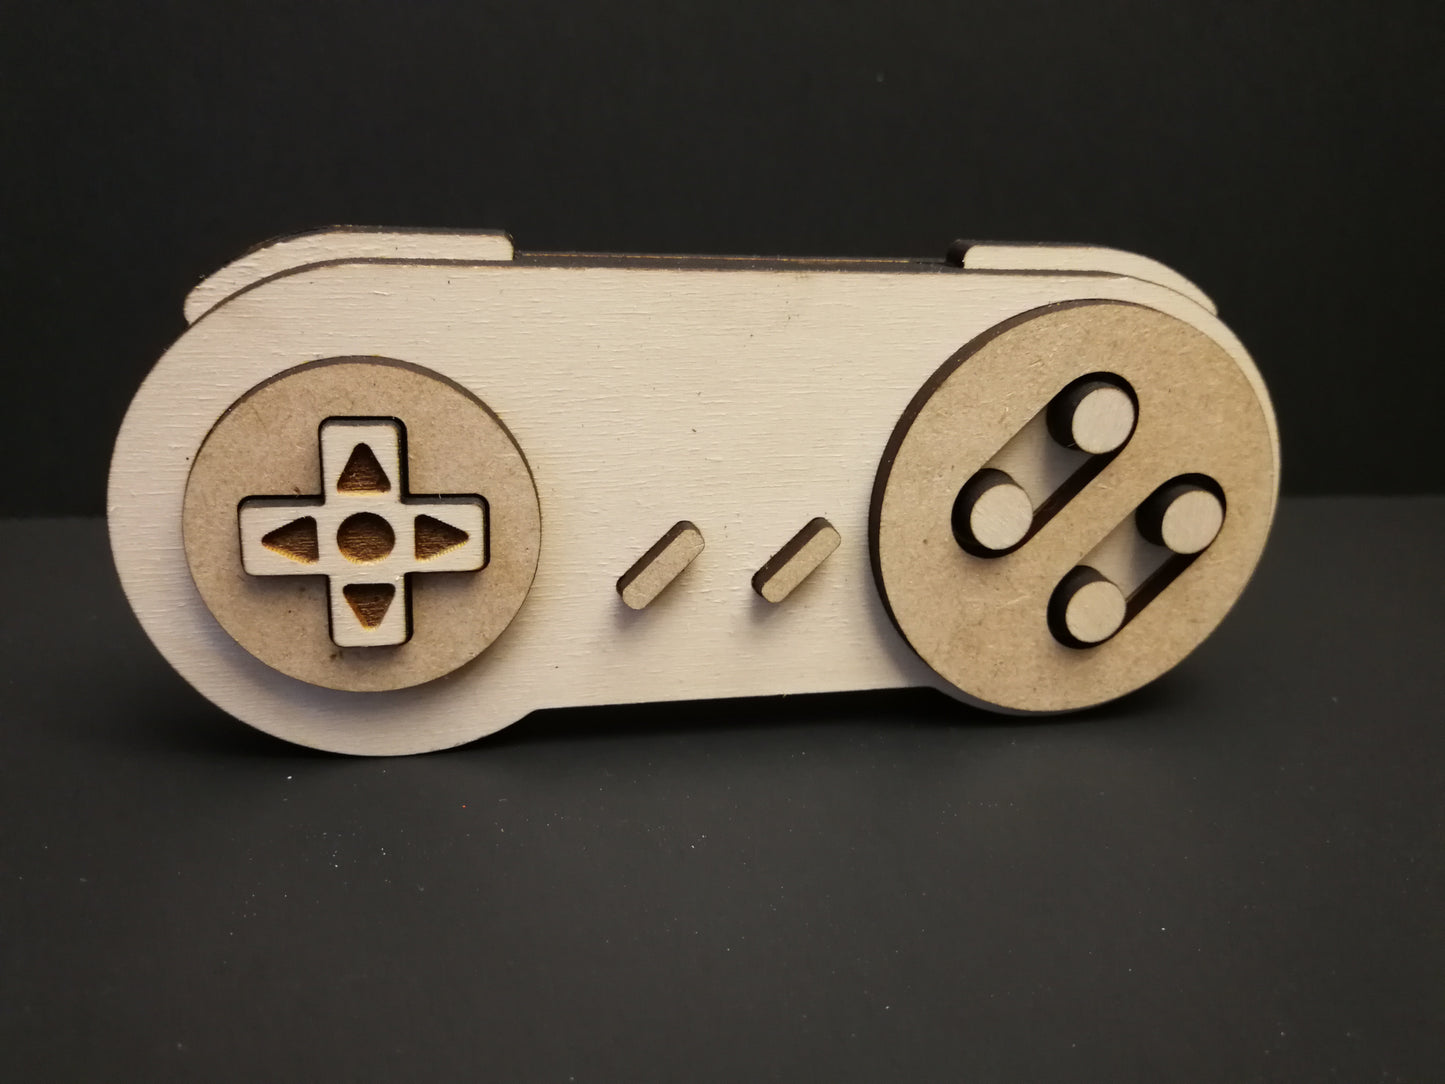 SNES Inspired Controller